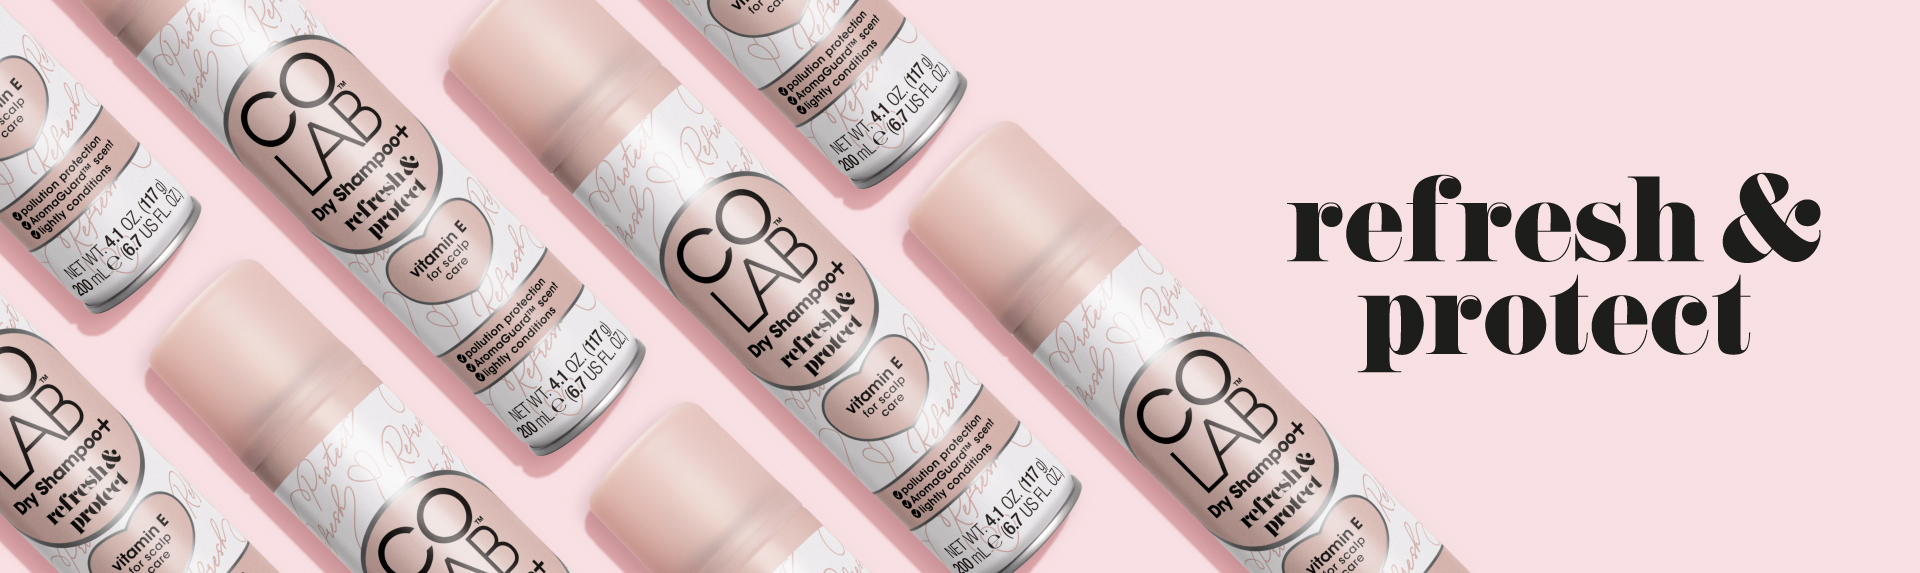 COLAB Dry Shampoo+ Refresh & Protect banner